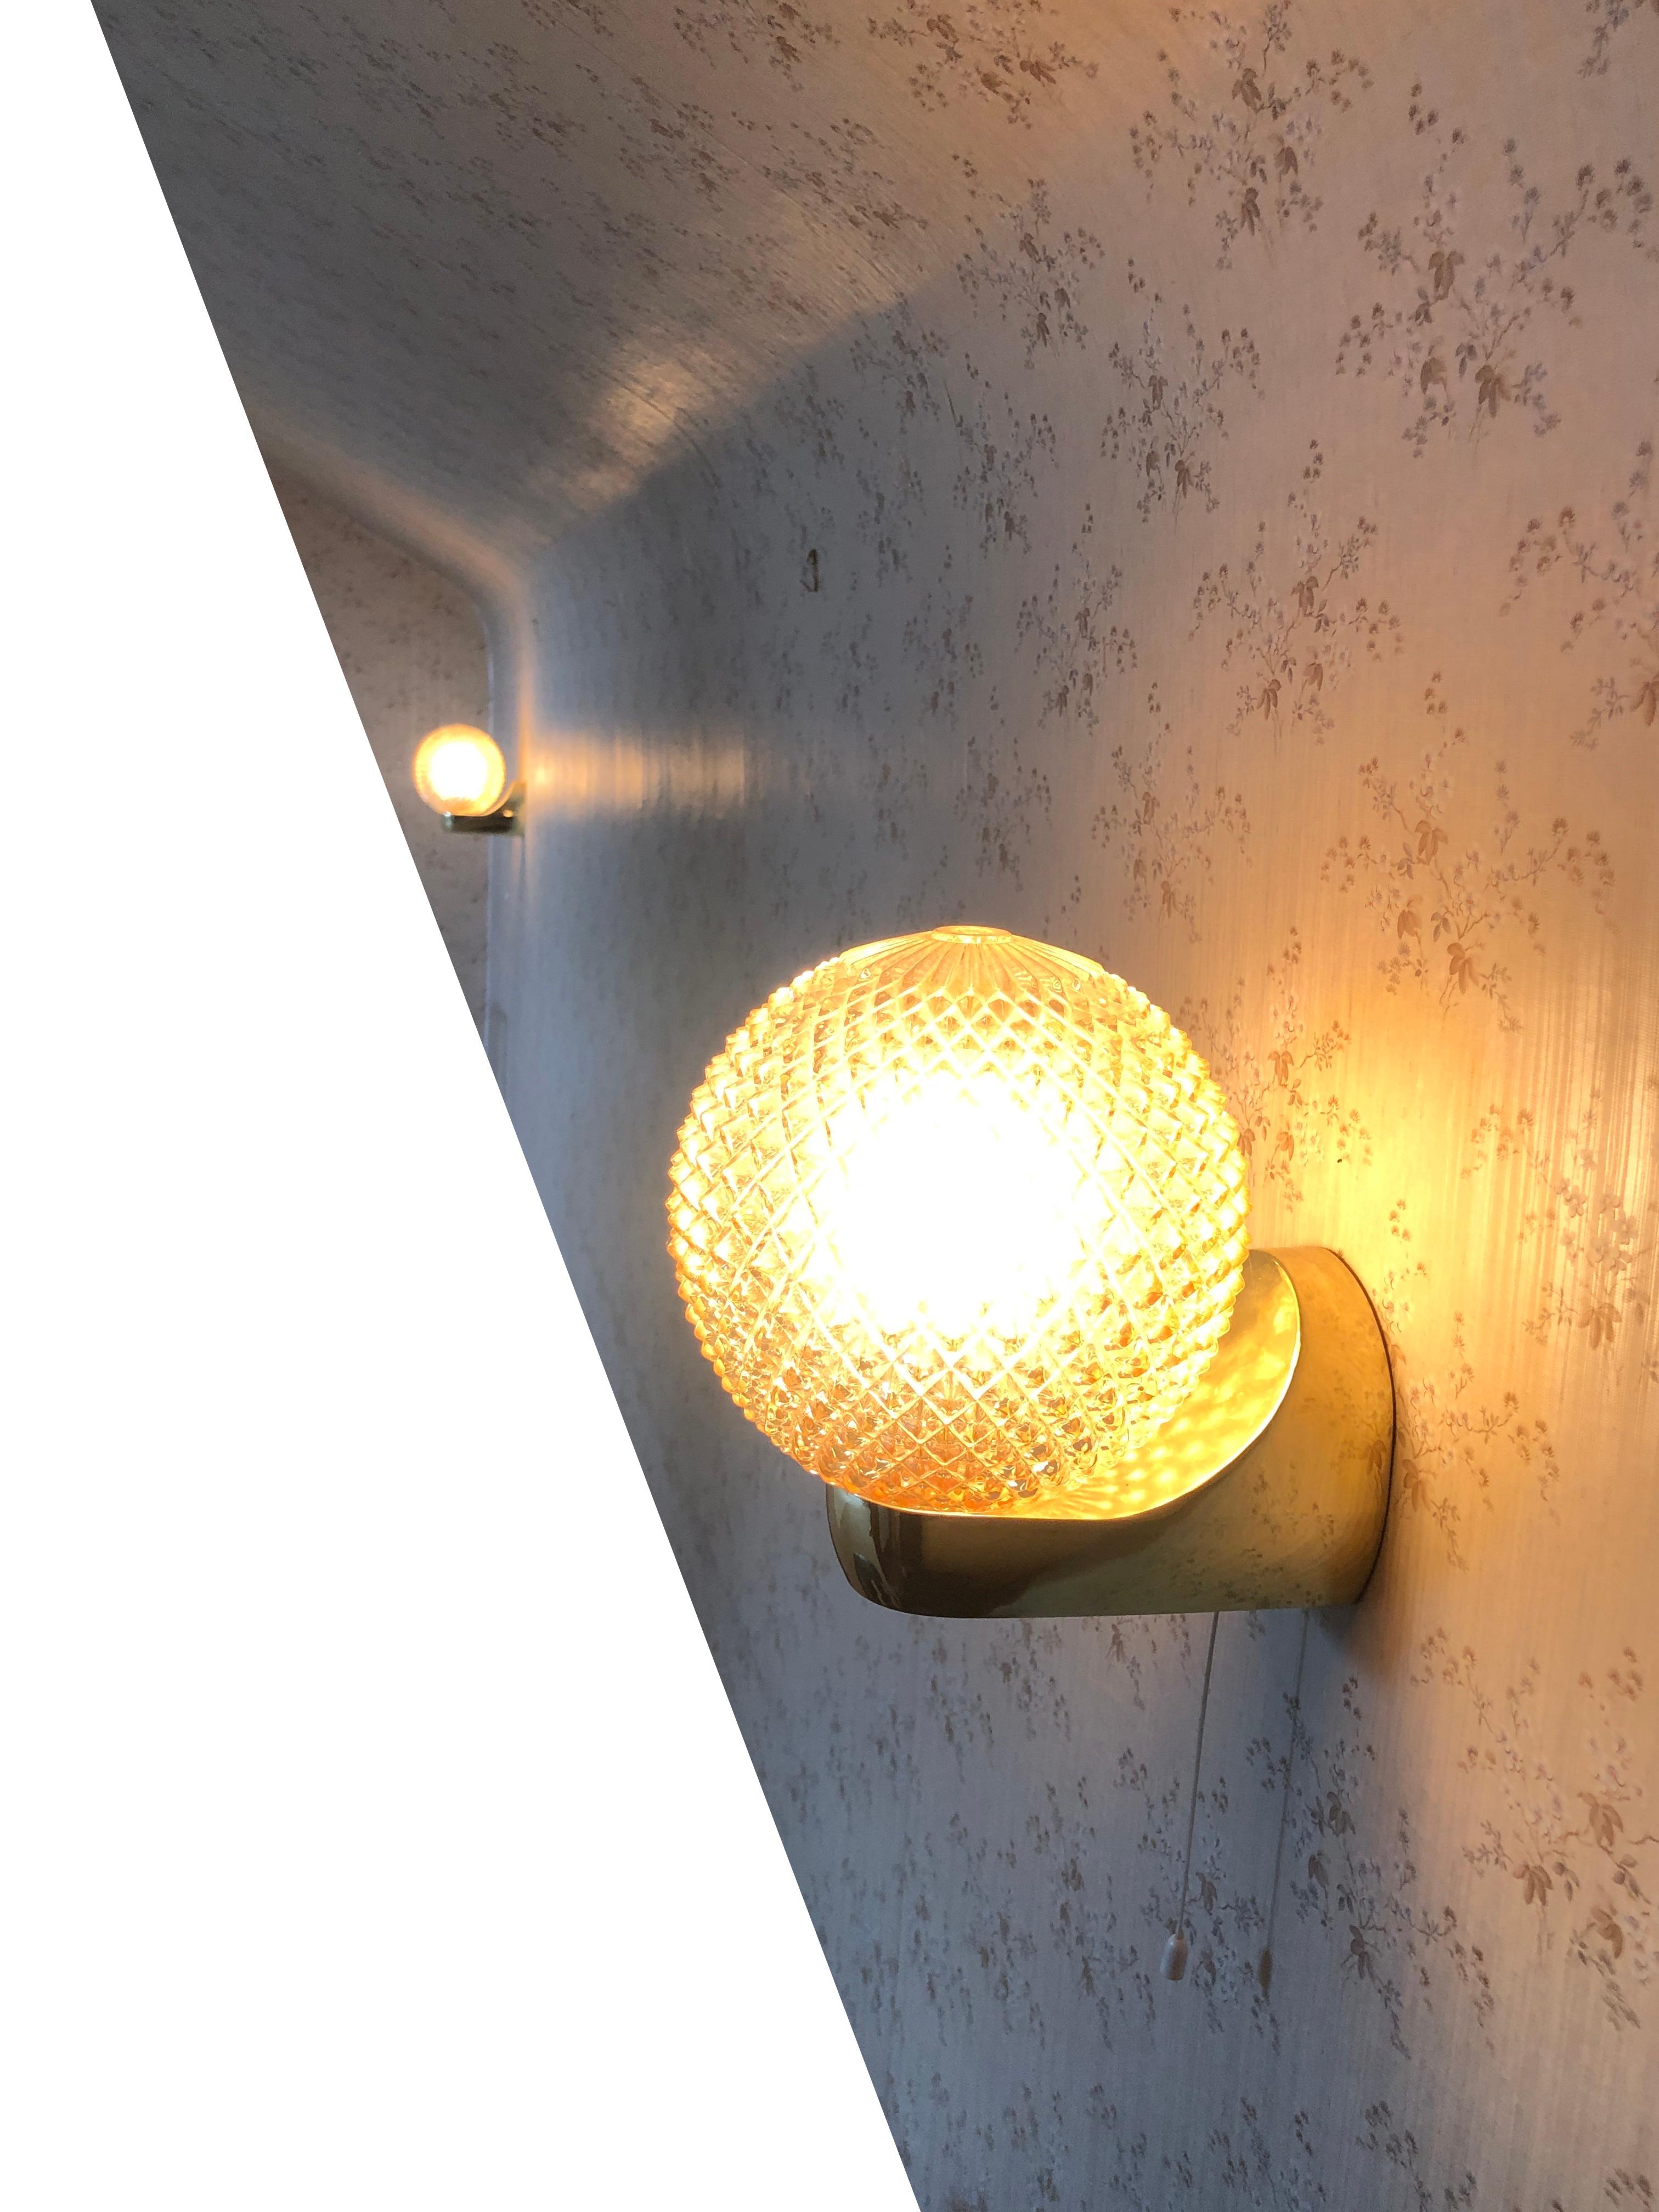 Metal Mid-Century Set of Wall Lamps Spiky Spheres, Amber Glow by RZB, Germany, 1980s For Sale